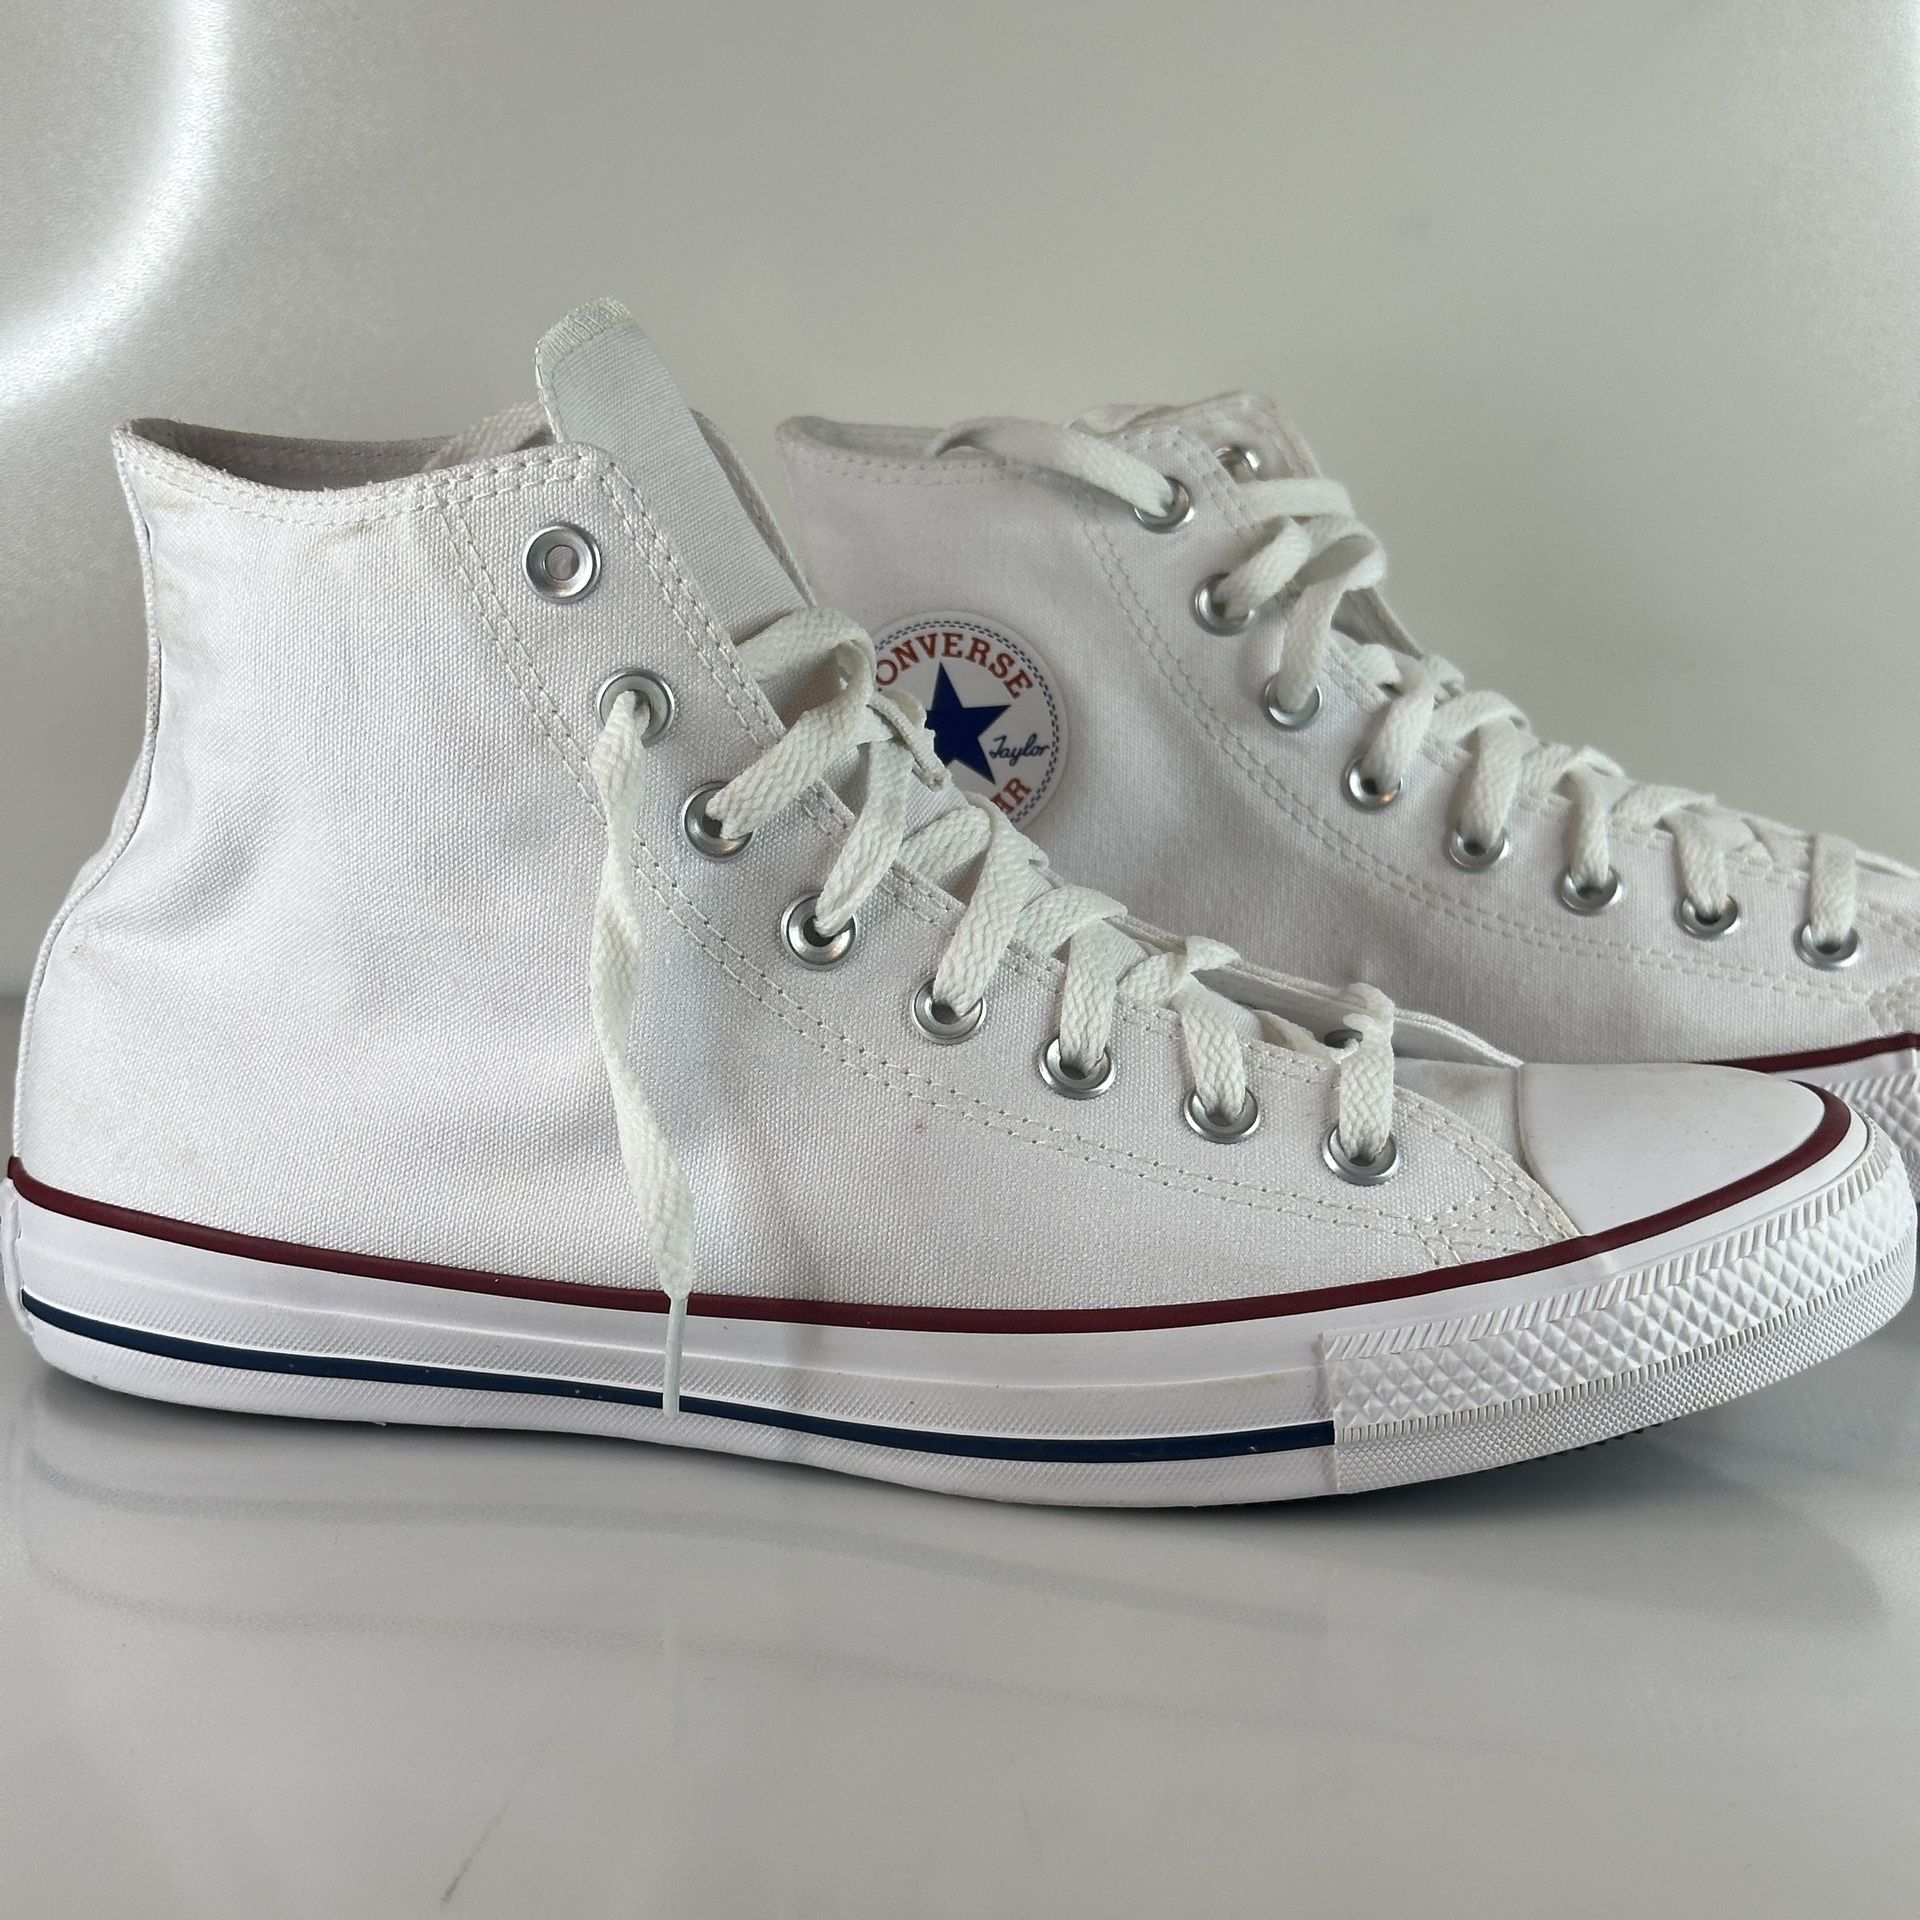 shoes sneakers converse white mens 9 women’s 11size US excellent quality good condition